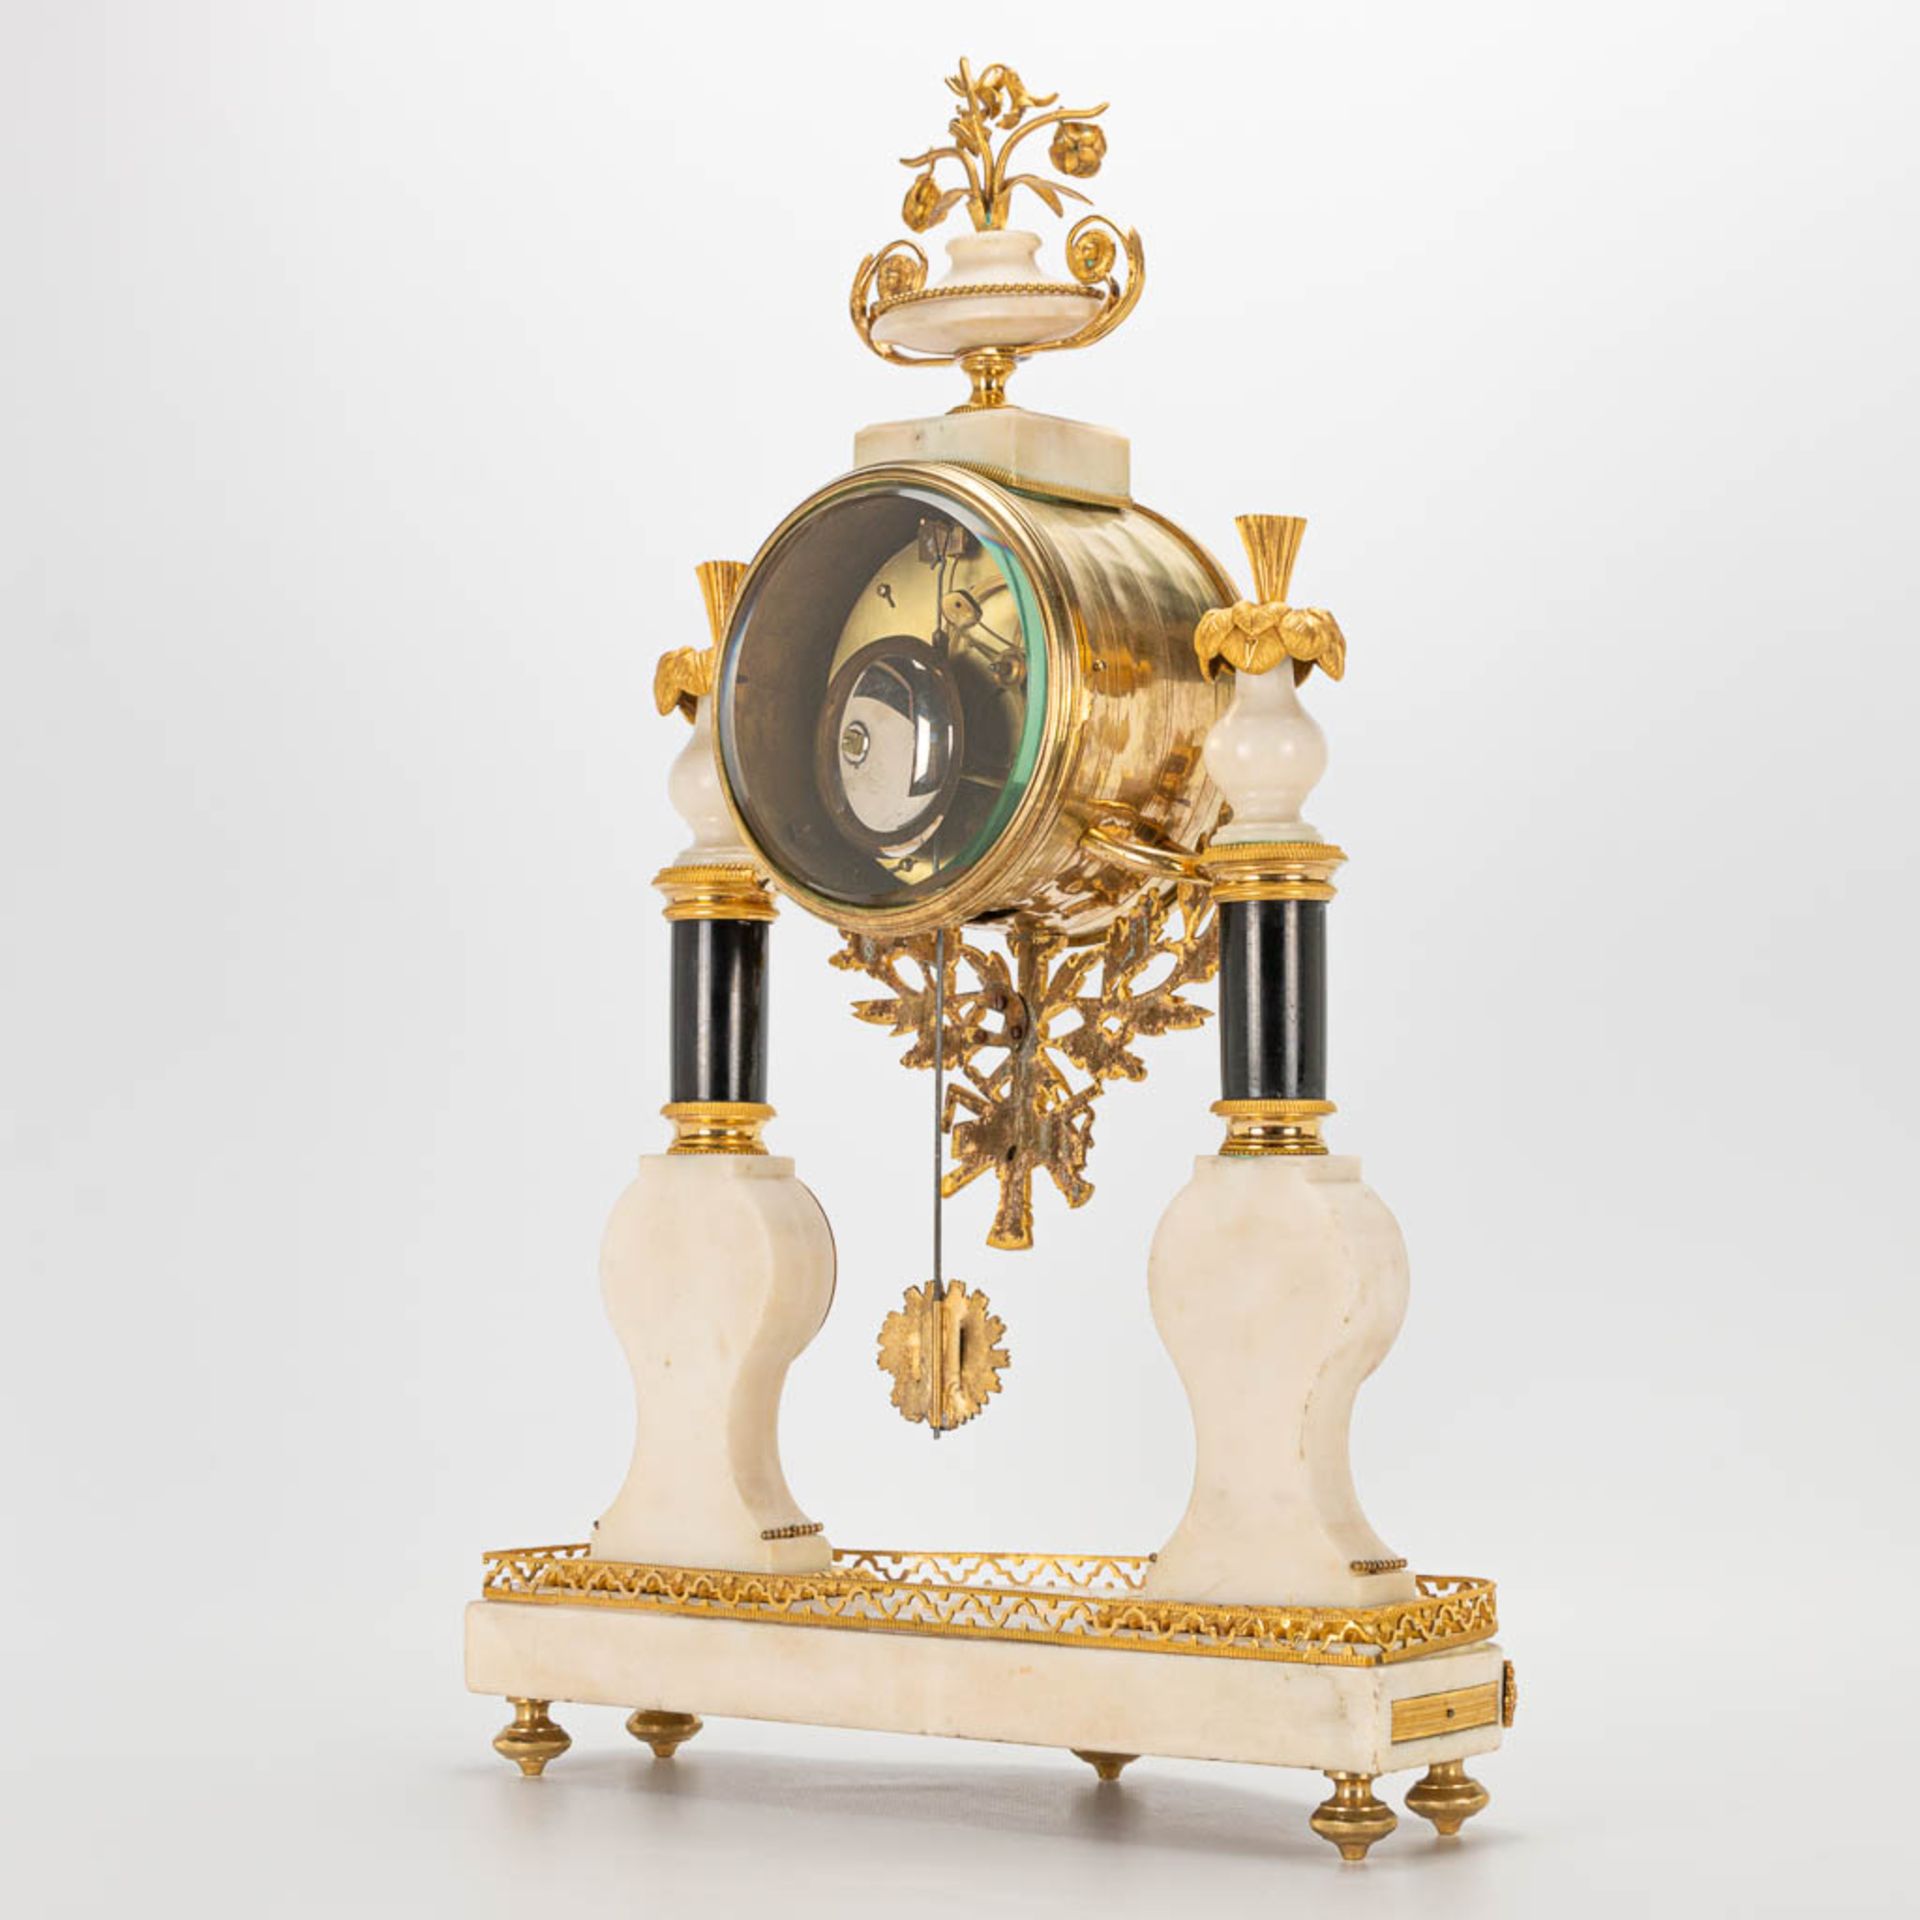 A Louis XVI style column clock made of bronze and marble, with handpainted Limoges plaques and marke - Image 5 of 23